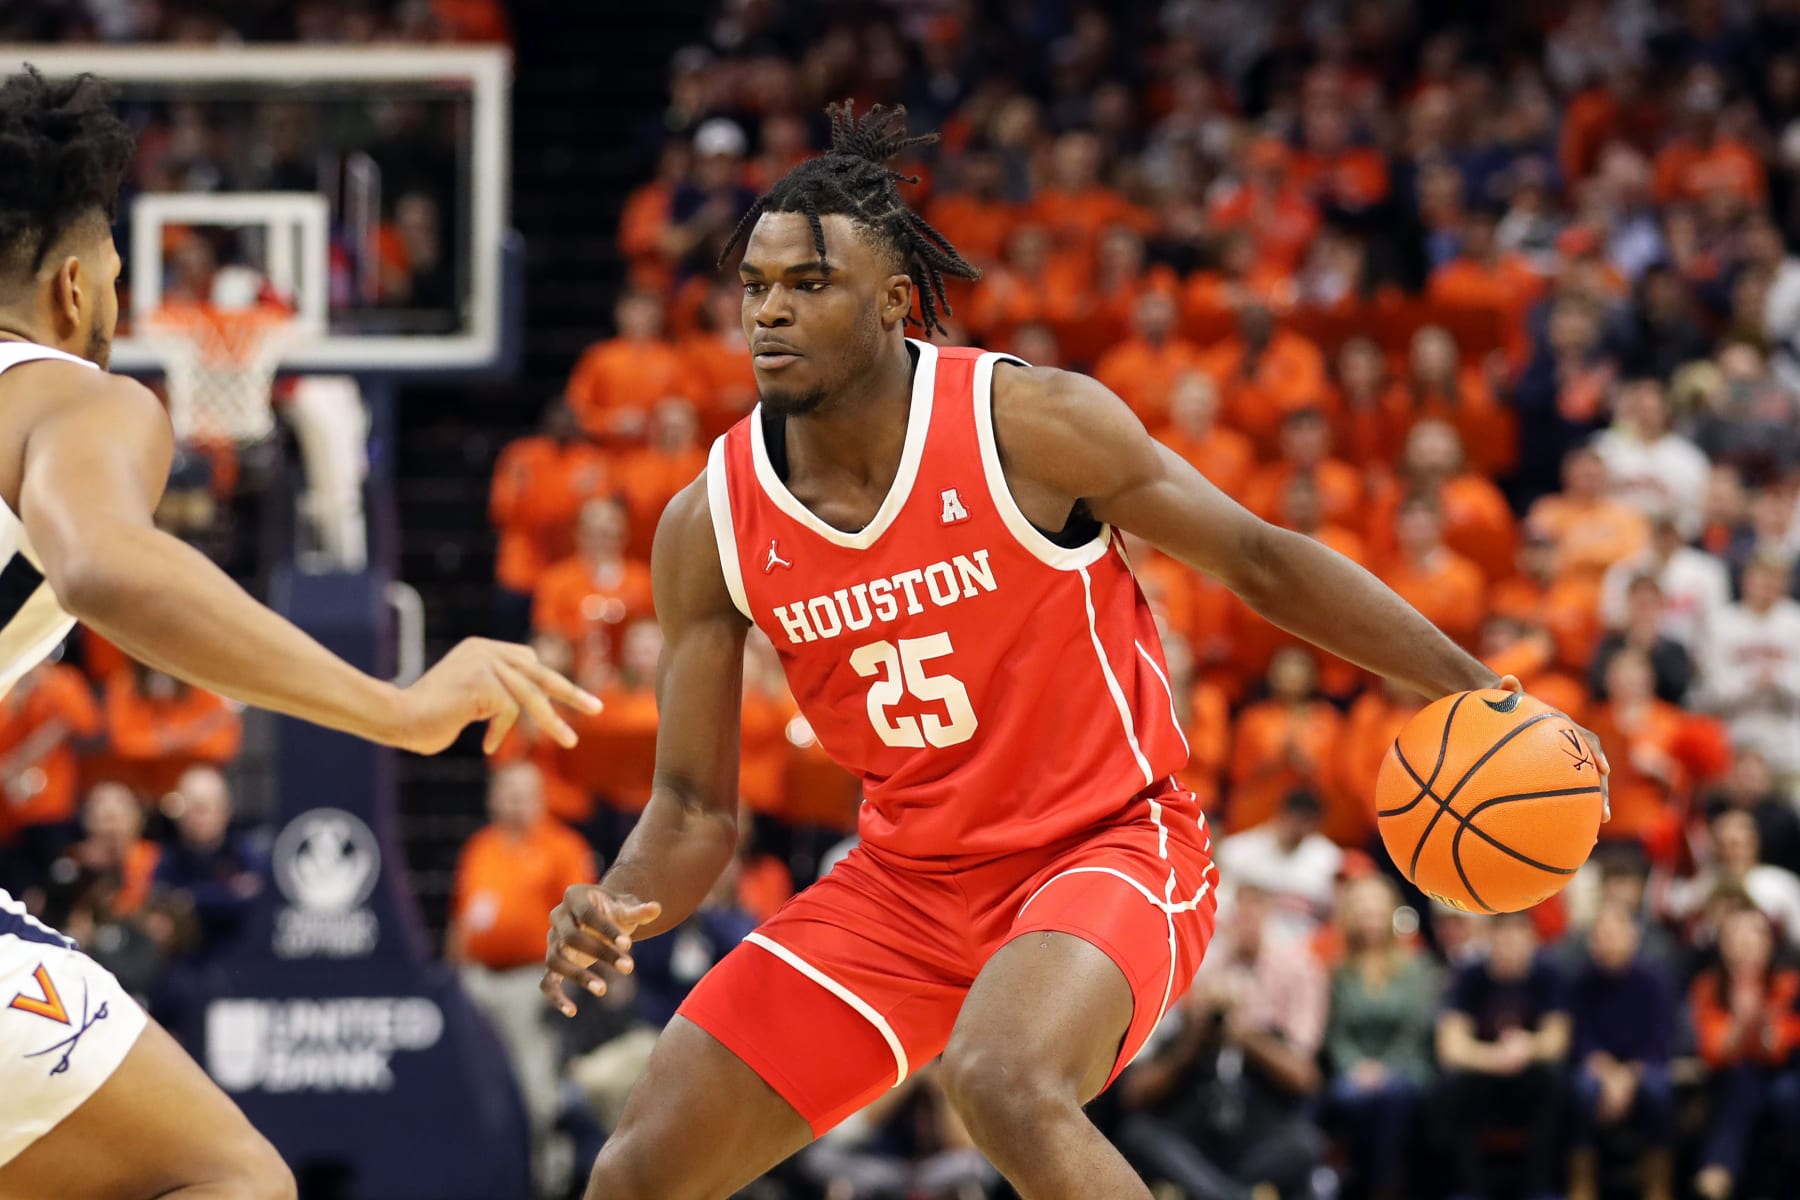 2023 NBA Mock Draft: Updated Full 2-Round Predictions, News, Scores,  Highlights, Stats, and Rumors